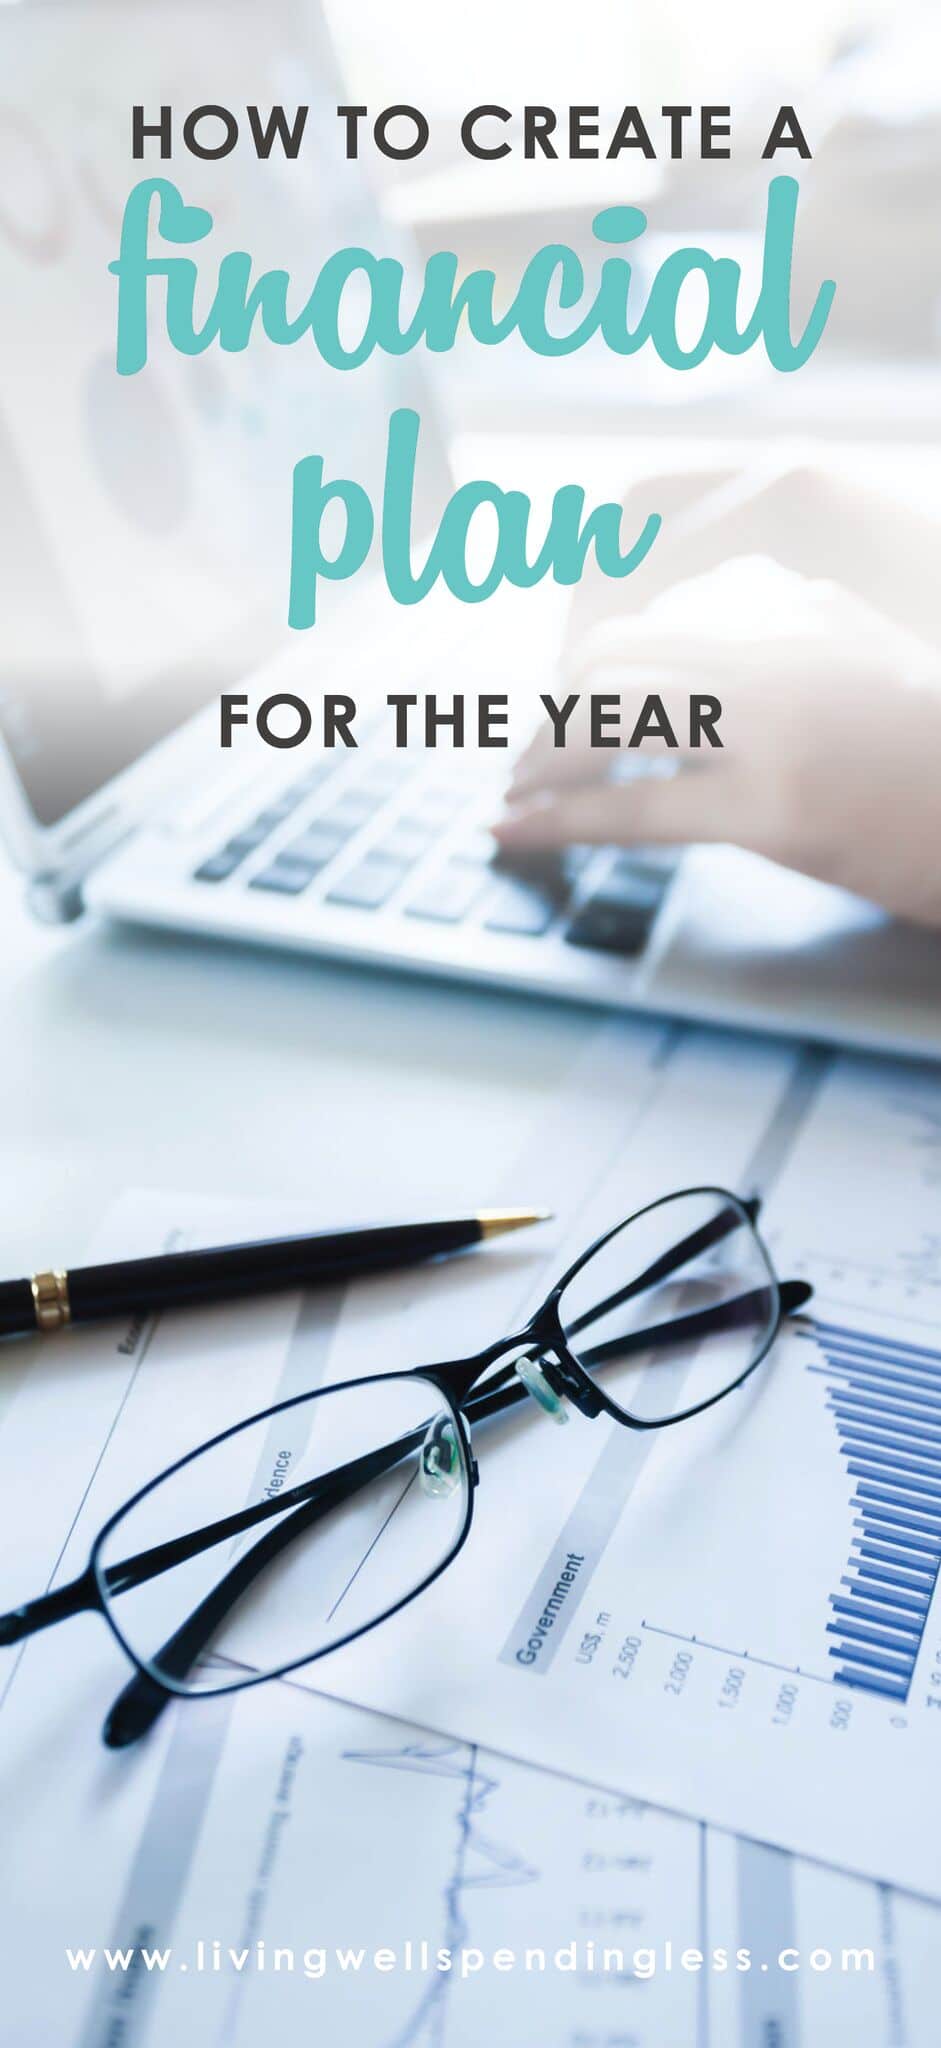 How to Create a Financial Plan for the Year